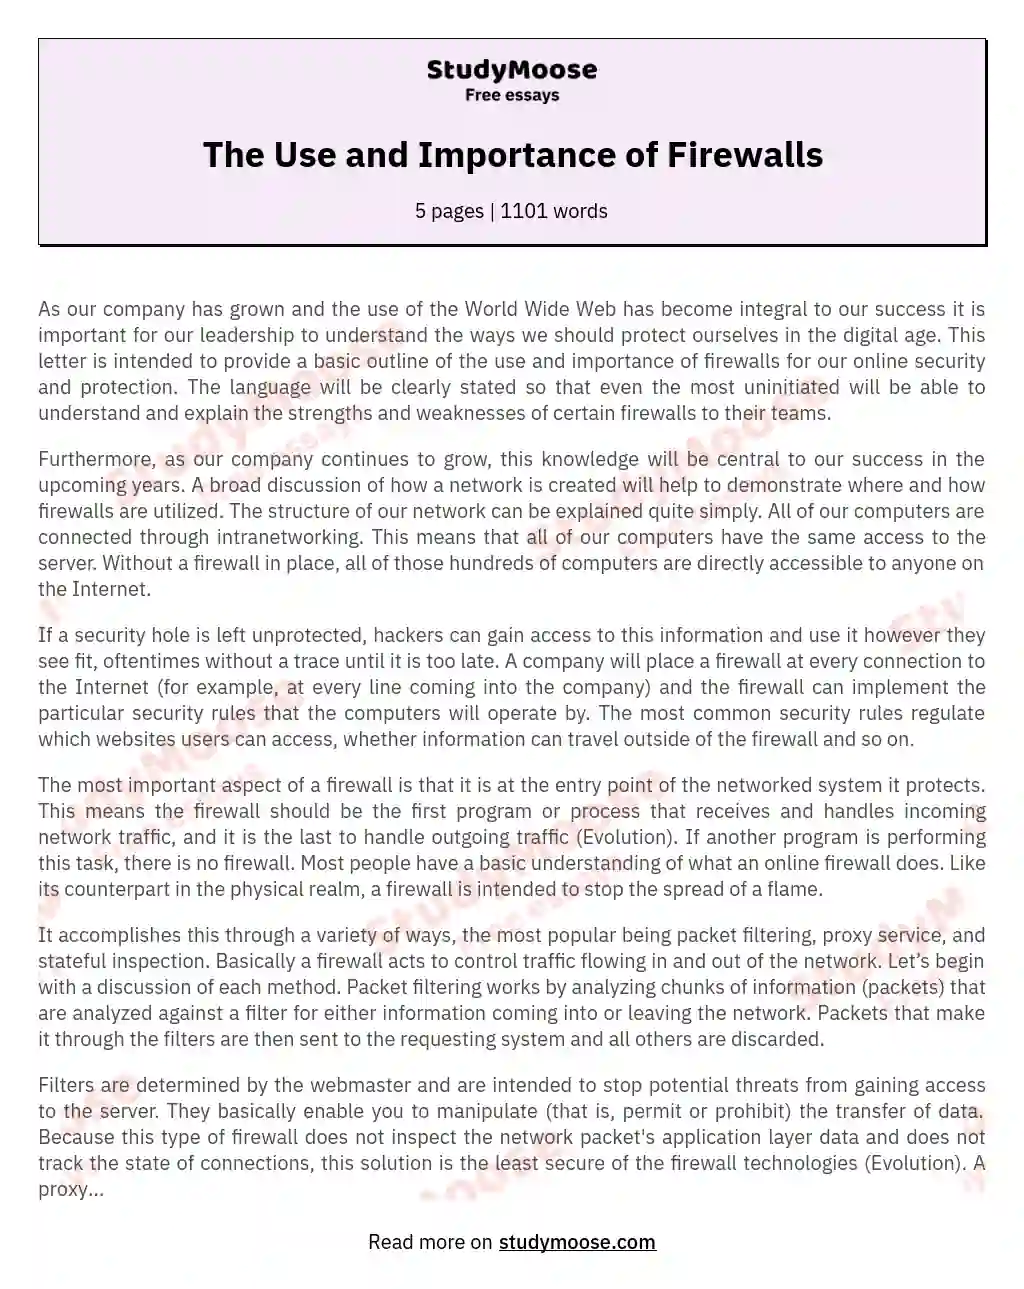 The Use and Importance of Firewalls essay